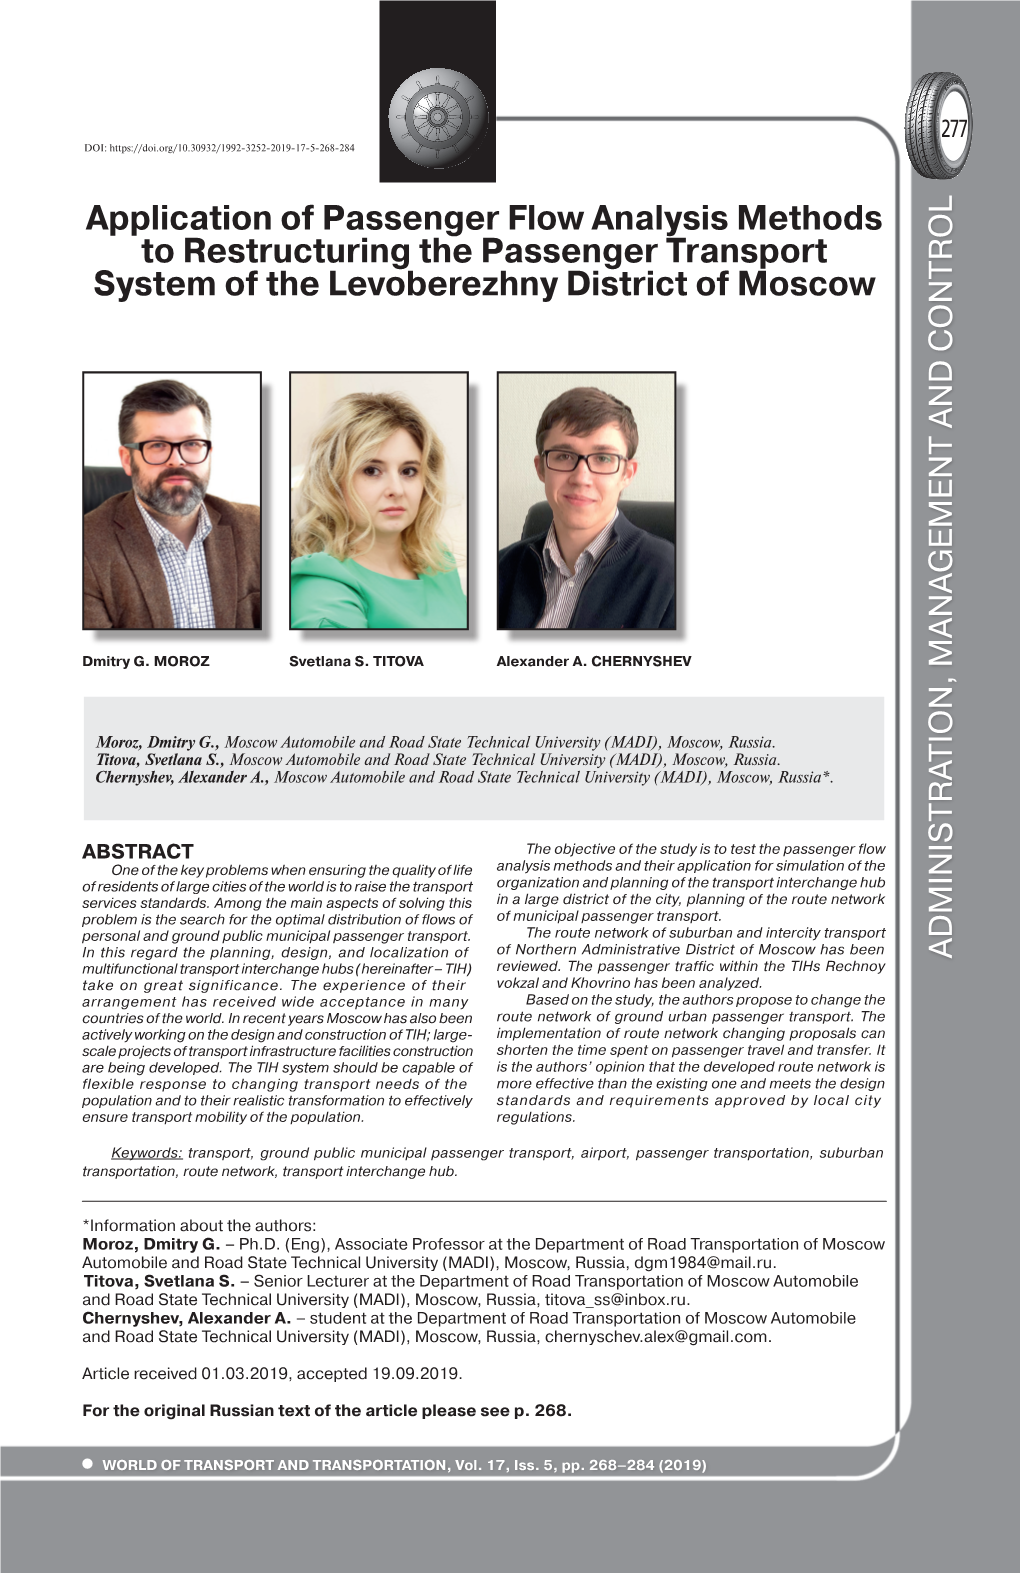 Application of Passenger Flow Analysis Methods to Restructuring the Passenger Transport System of the Levoberezhny District of Moscow